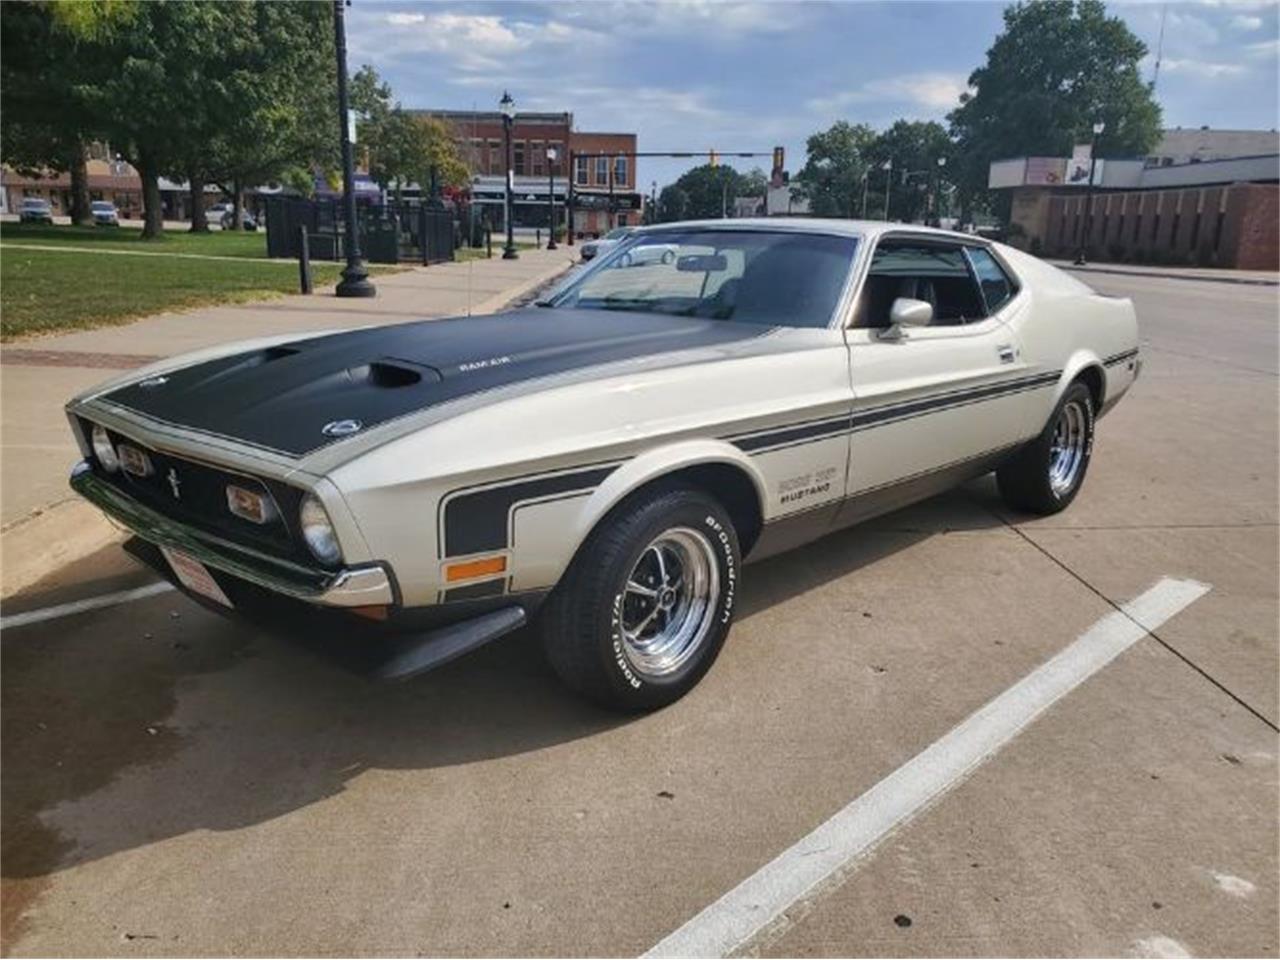 For Sale: 1971 Ford Mustang in Cadillac, Michigan for sale in Cadillac, MI